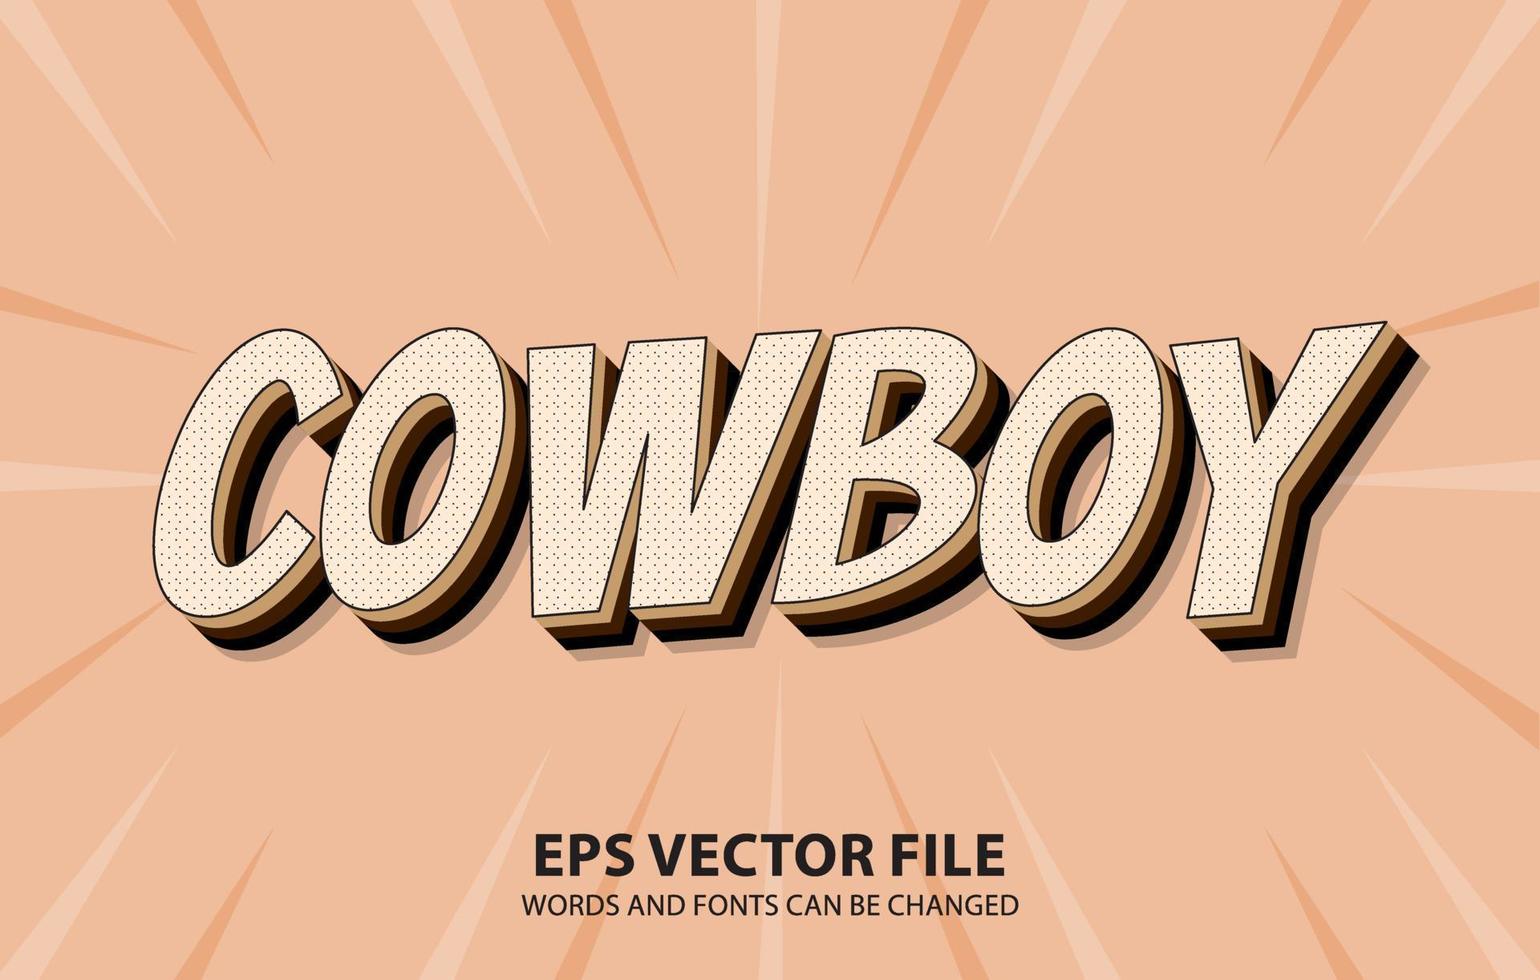 Editable text effect, Cowboy 3d text style template free, Comic Background, text effect template, vector text effect